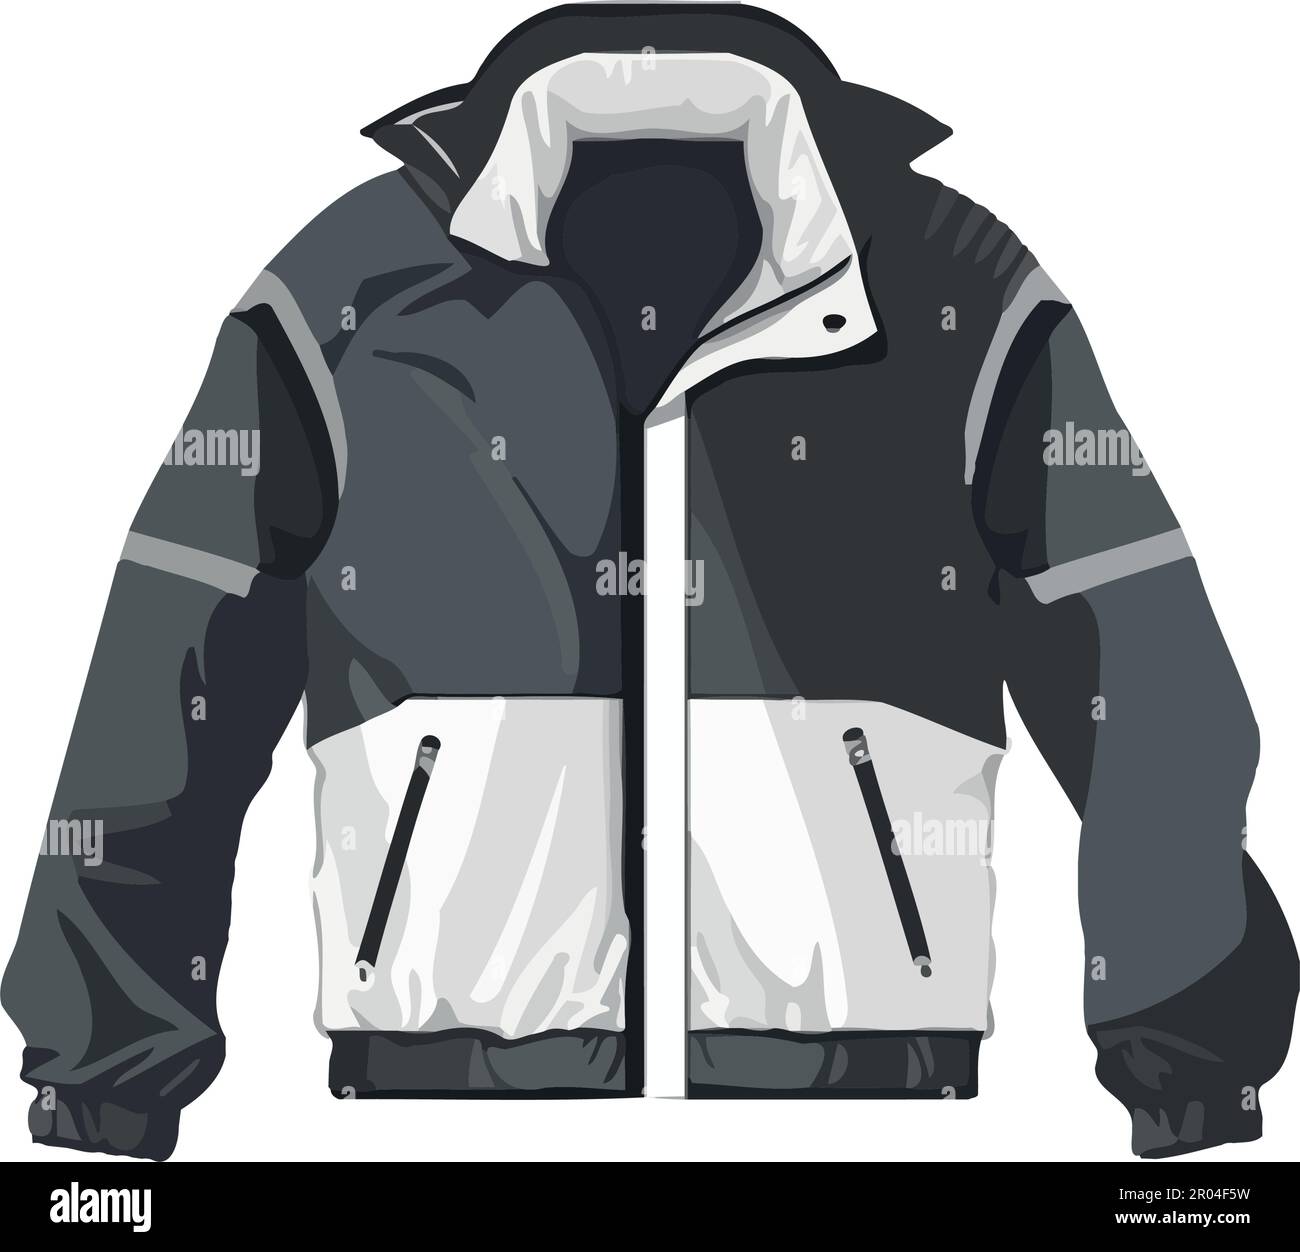 Fashionable winter jacket with zipper and pockets over white Stock Vector